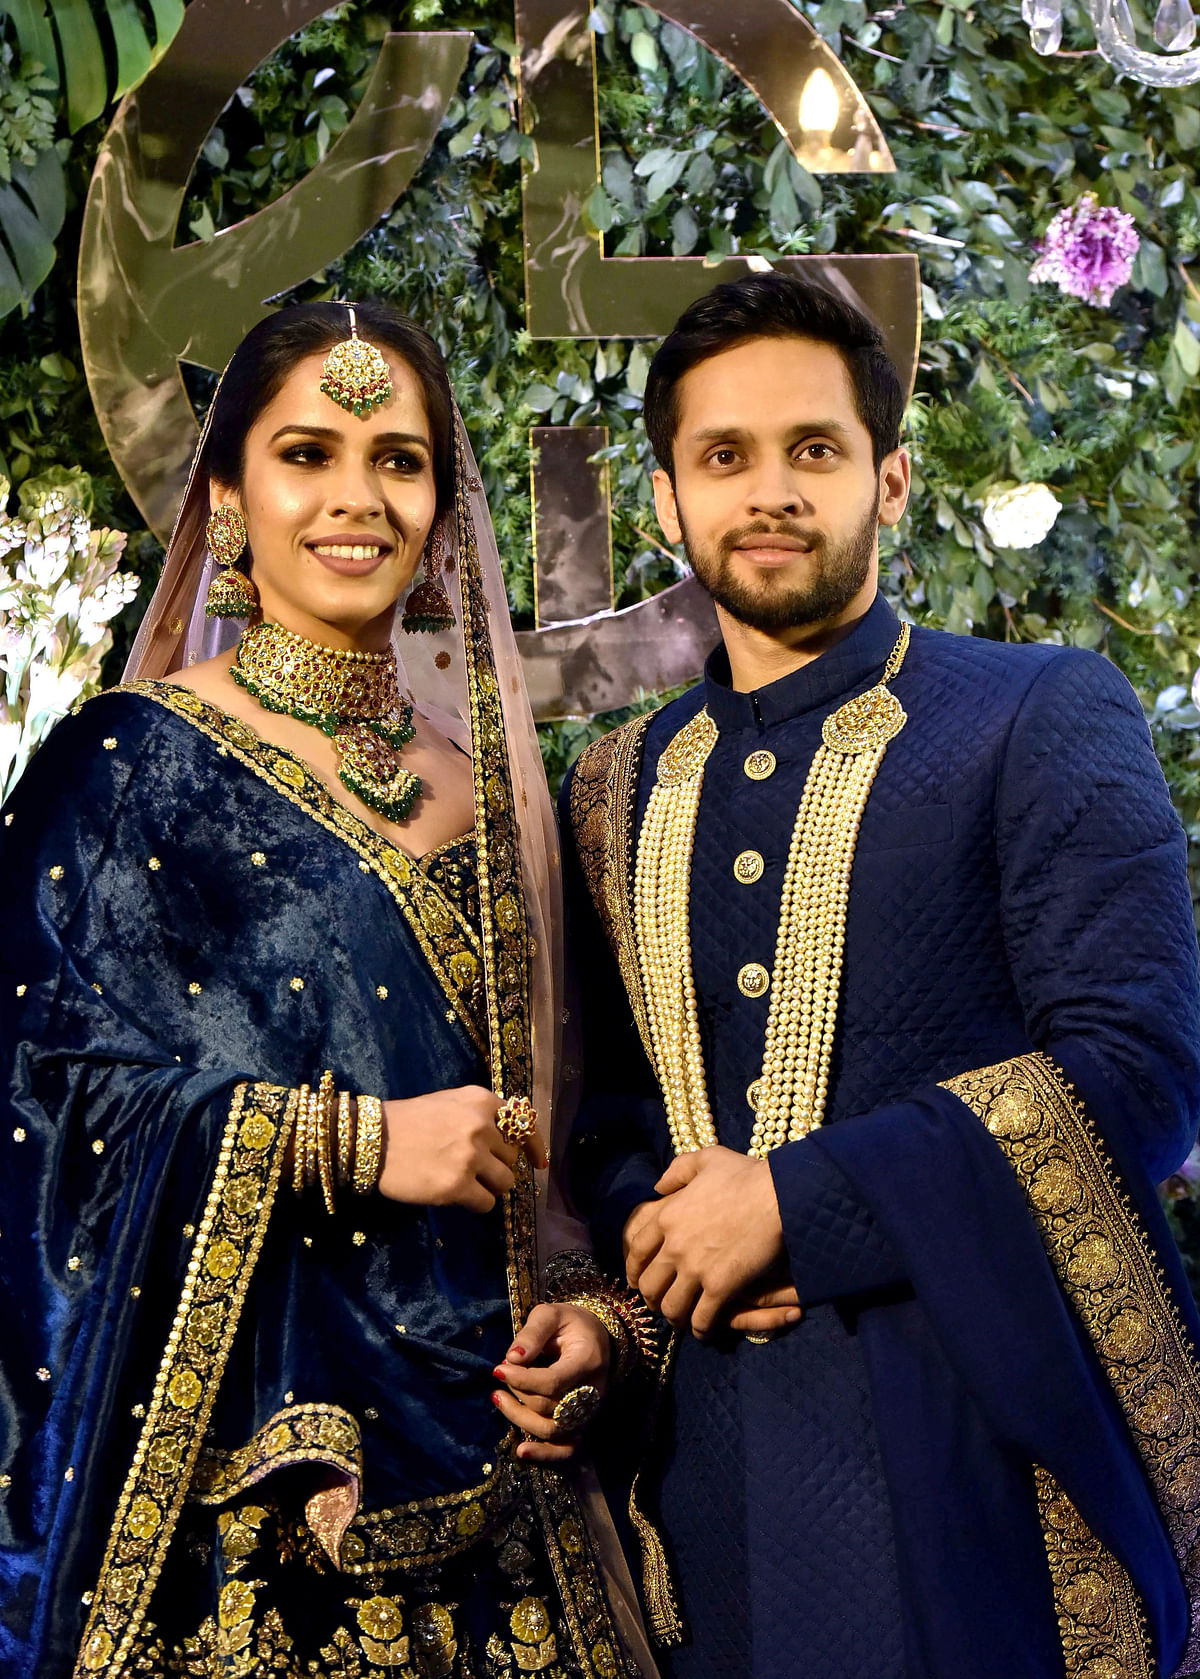 Saina Nehwal and Parupalli Kashyap are indeed the ‘best match’.